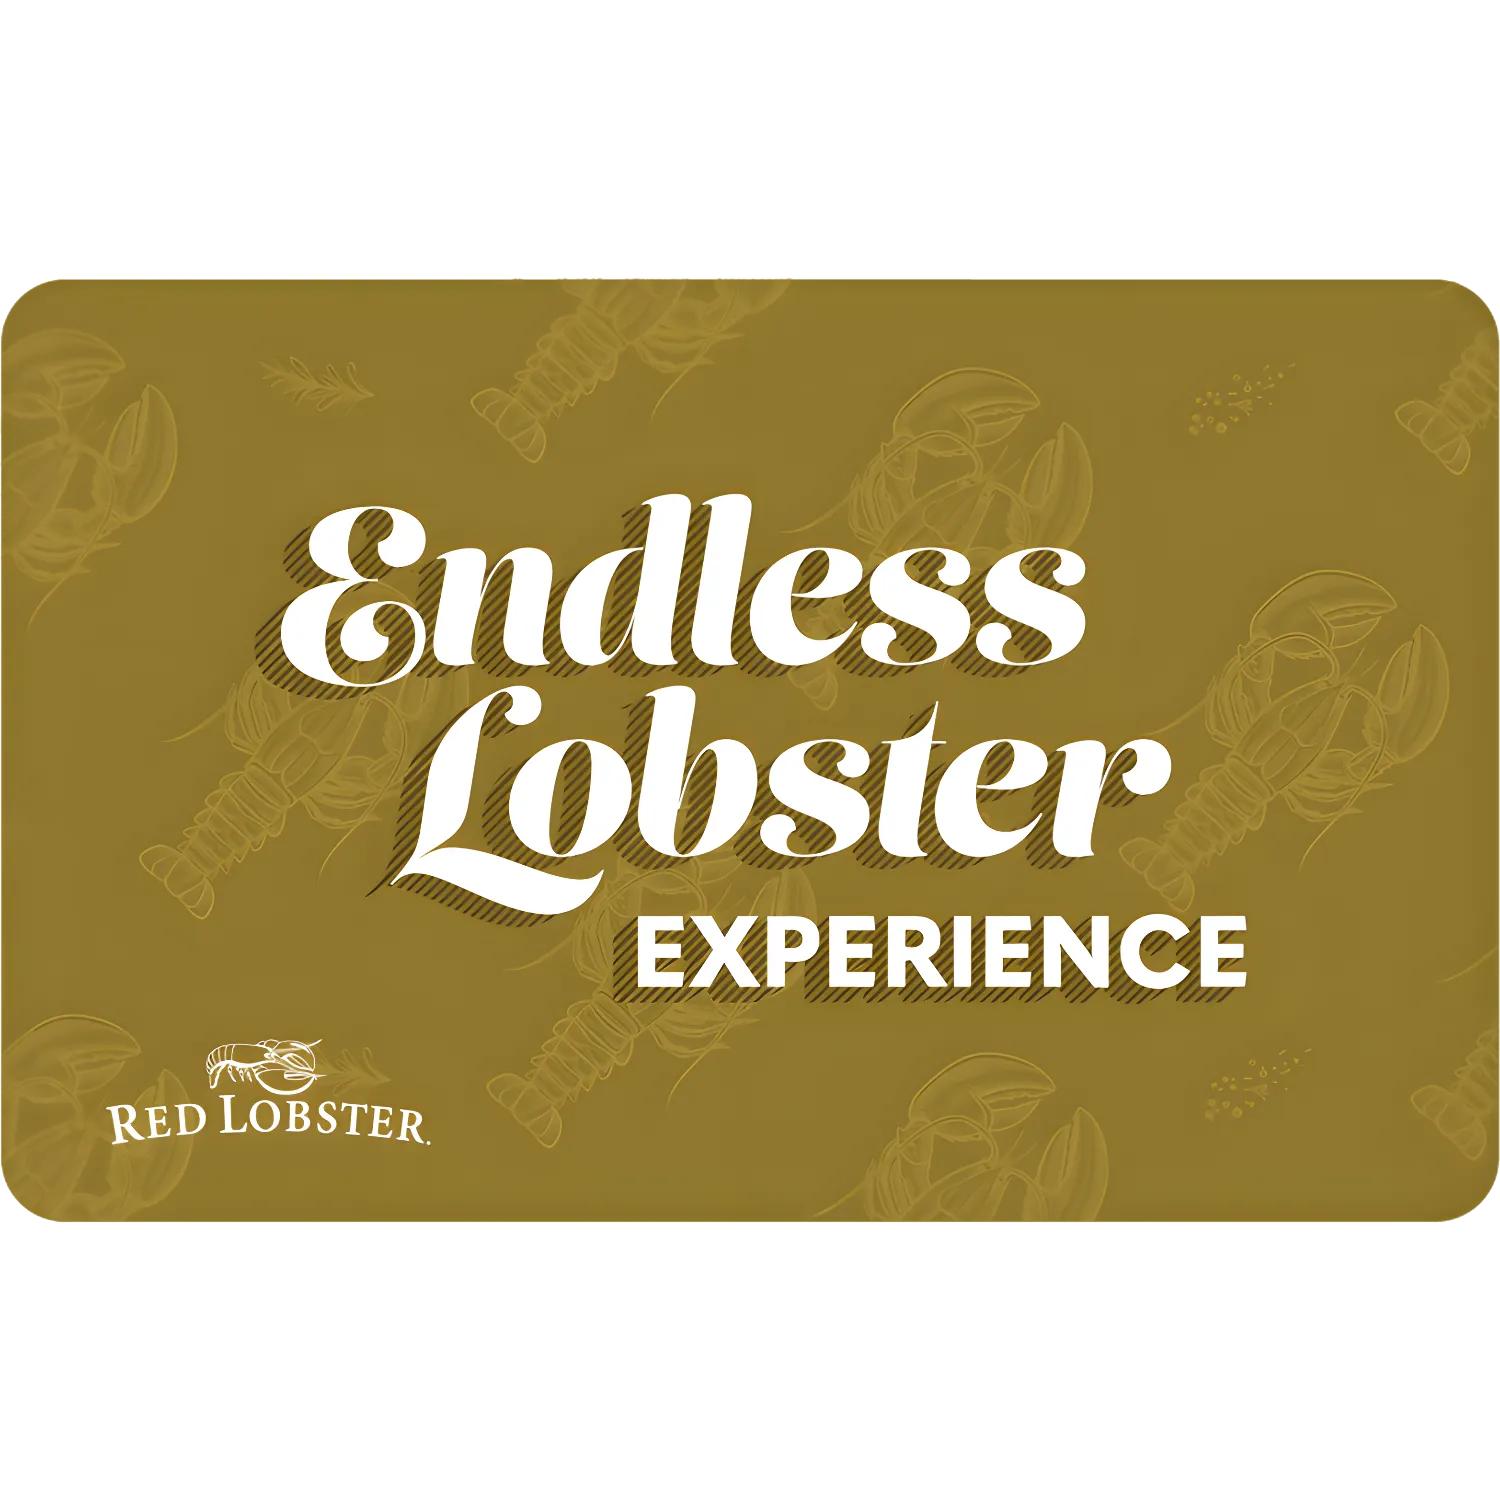 Free Endless Lobster Experience At Lobsterfest